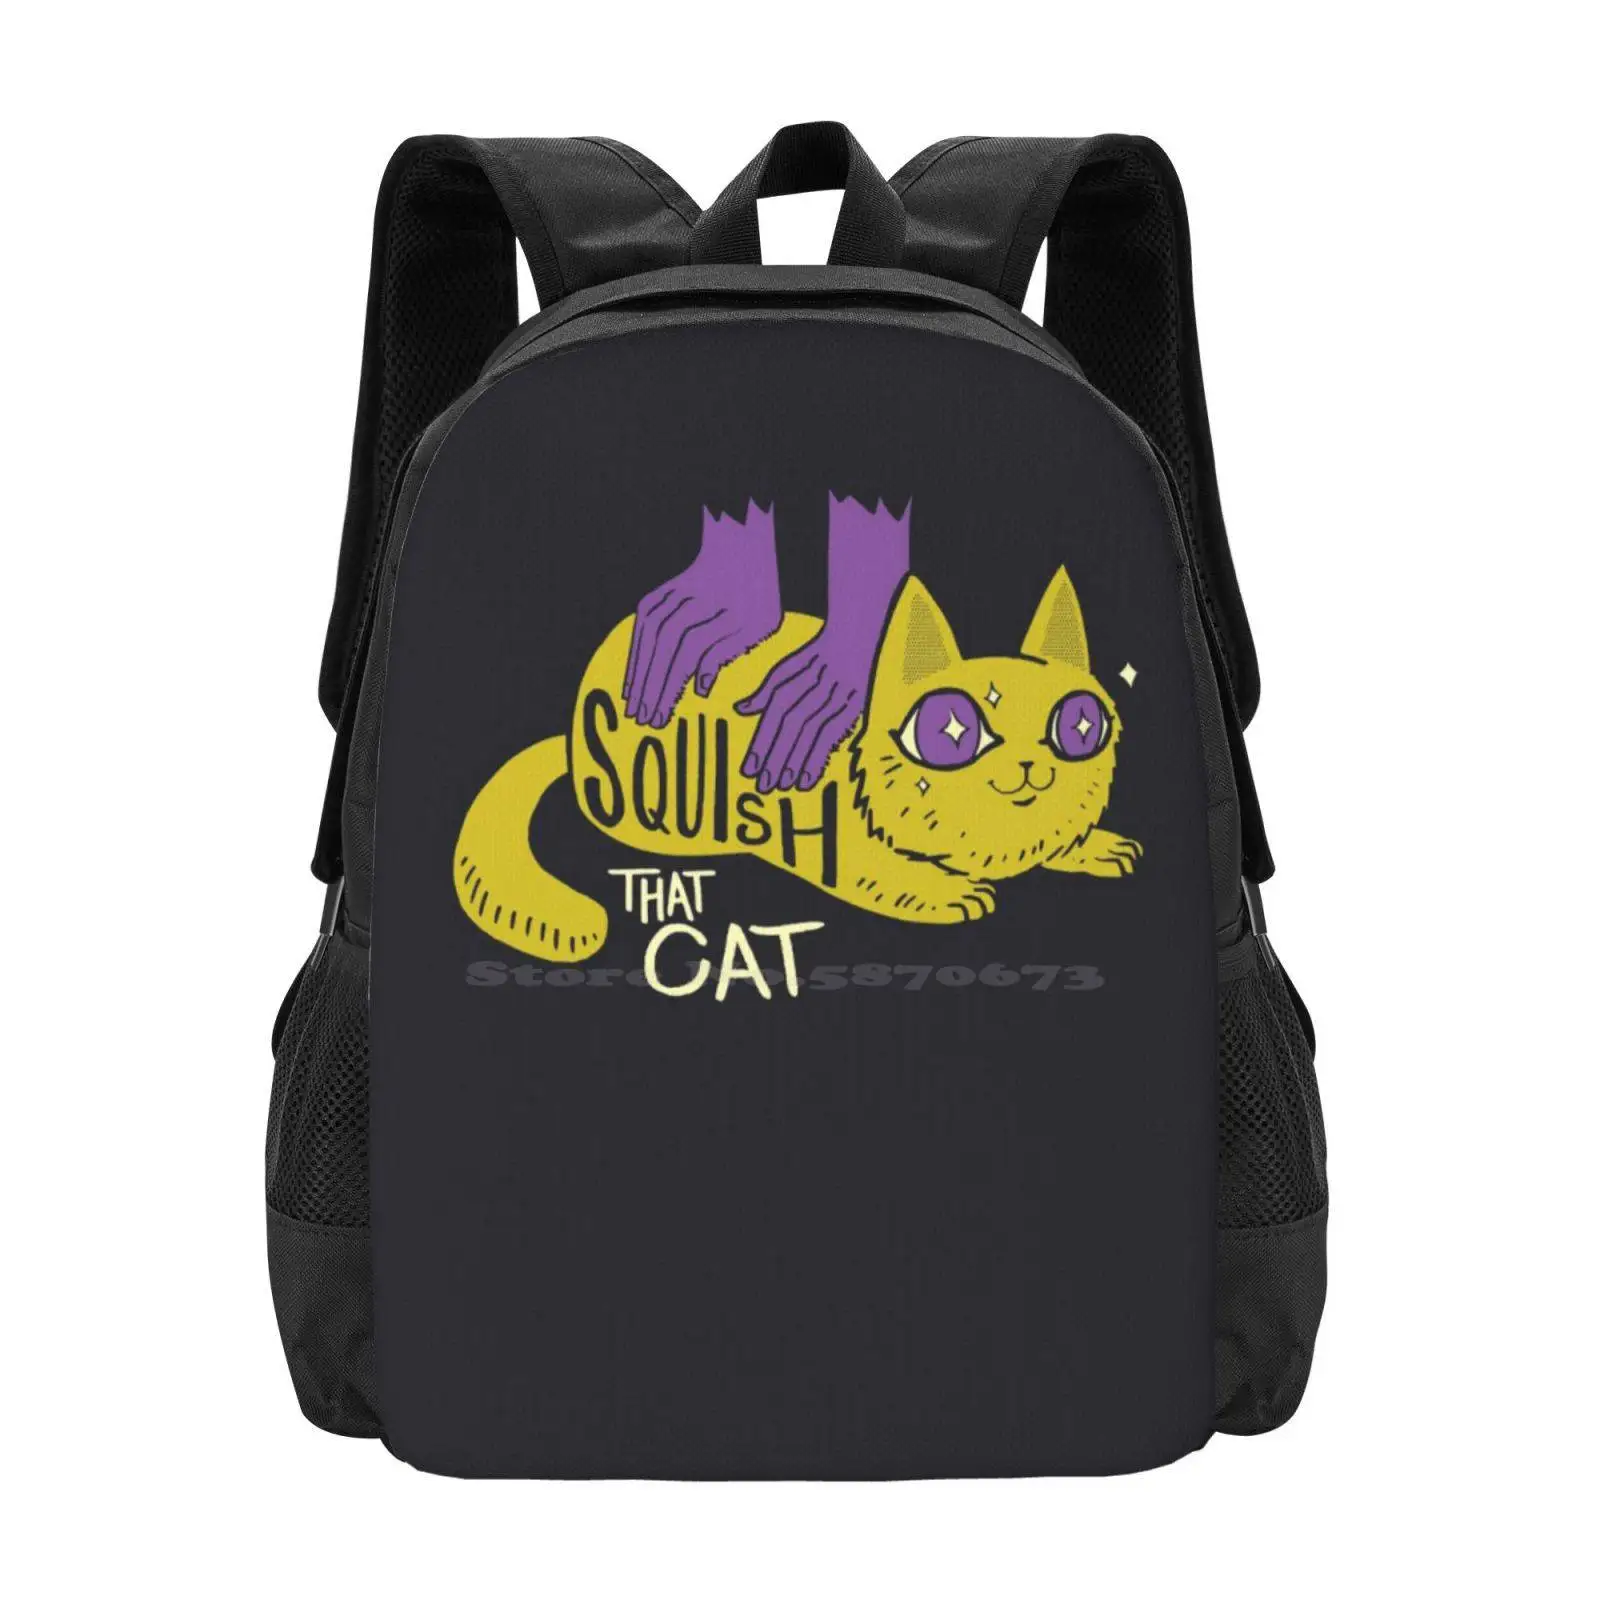 Squish That Cat! Pattern Design Bag Student'S Backpack Squishthatcat Squish That Cat Adorable Cute Cats Youtube Pets Vets